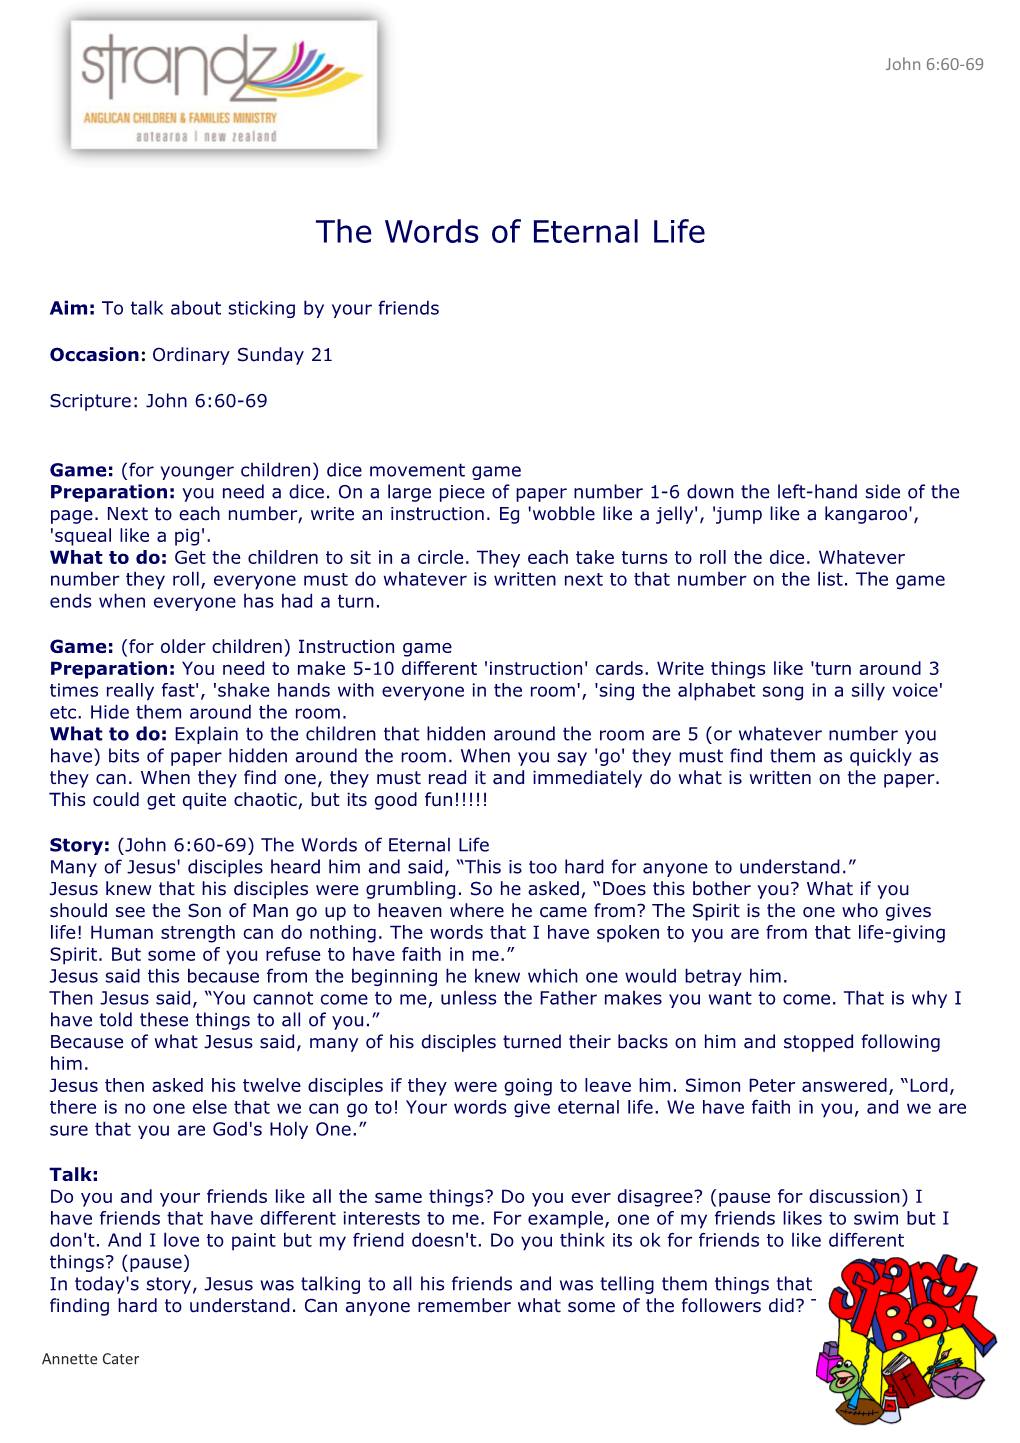 The Words of Eternal Life